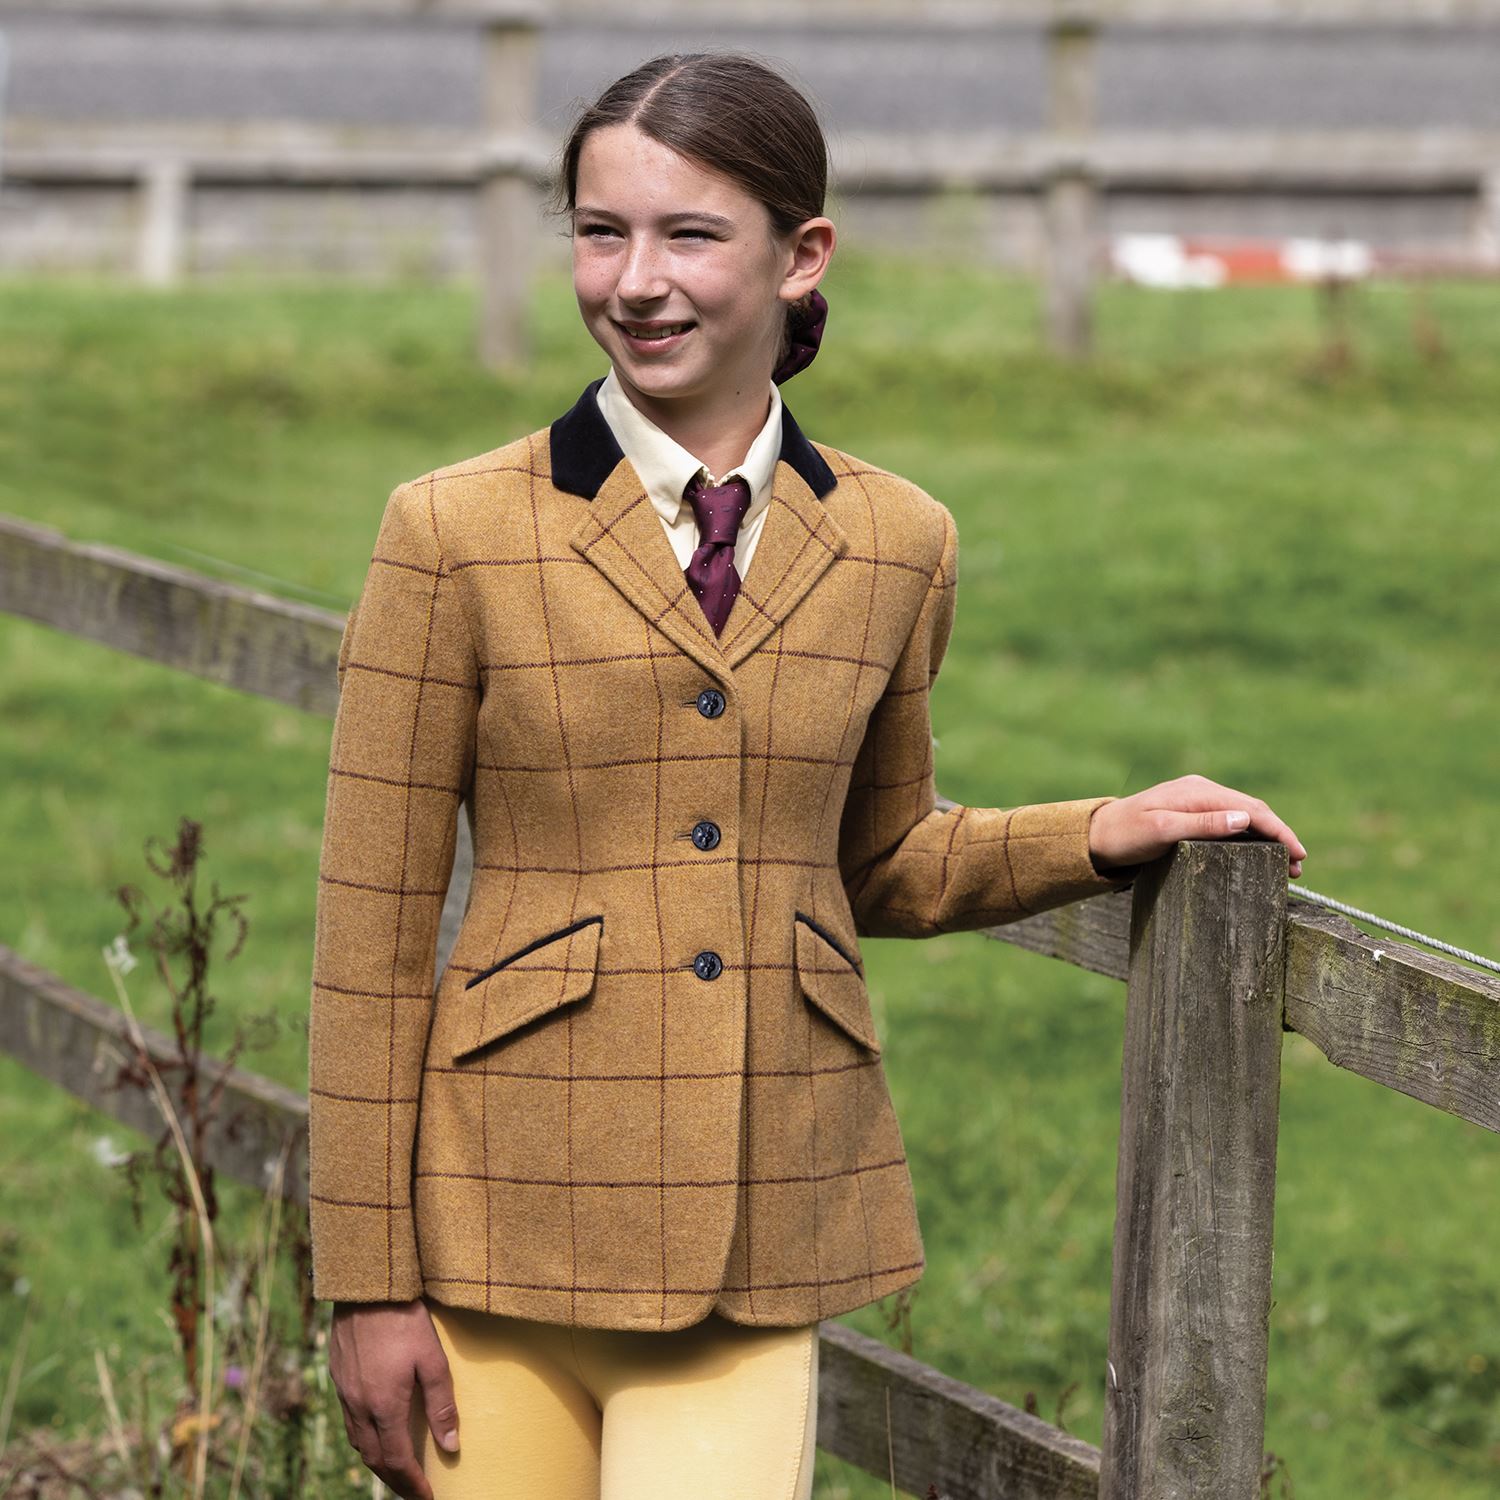 Equetech Childs Wheatley Deluxe Tweed Riding Jacket - Just Horse Riders